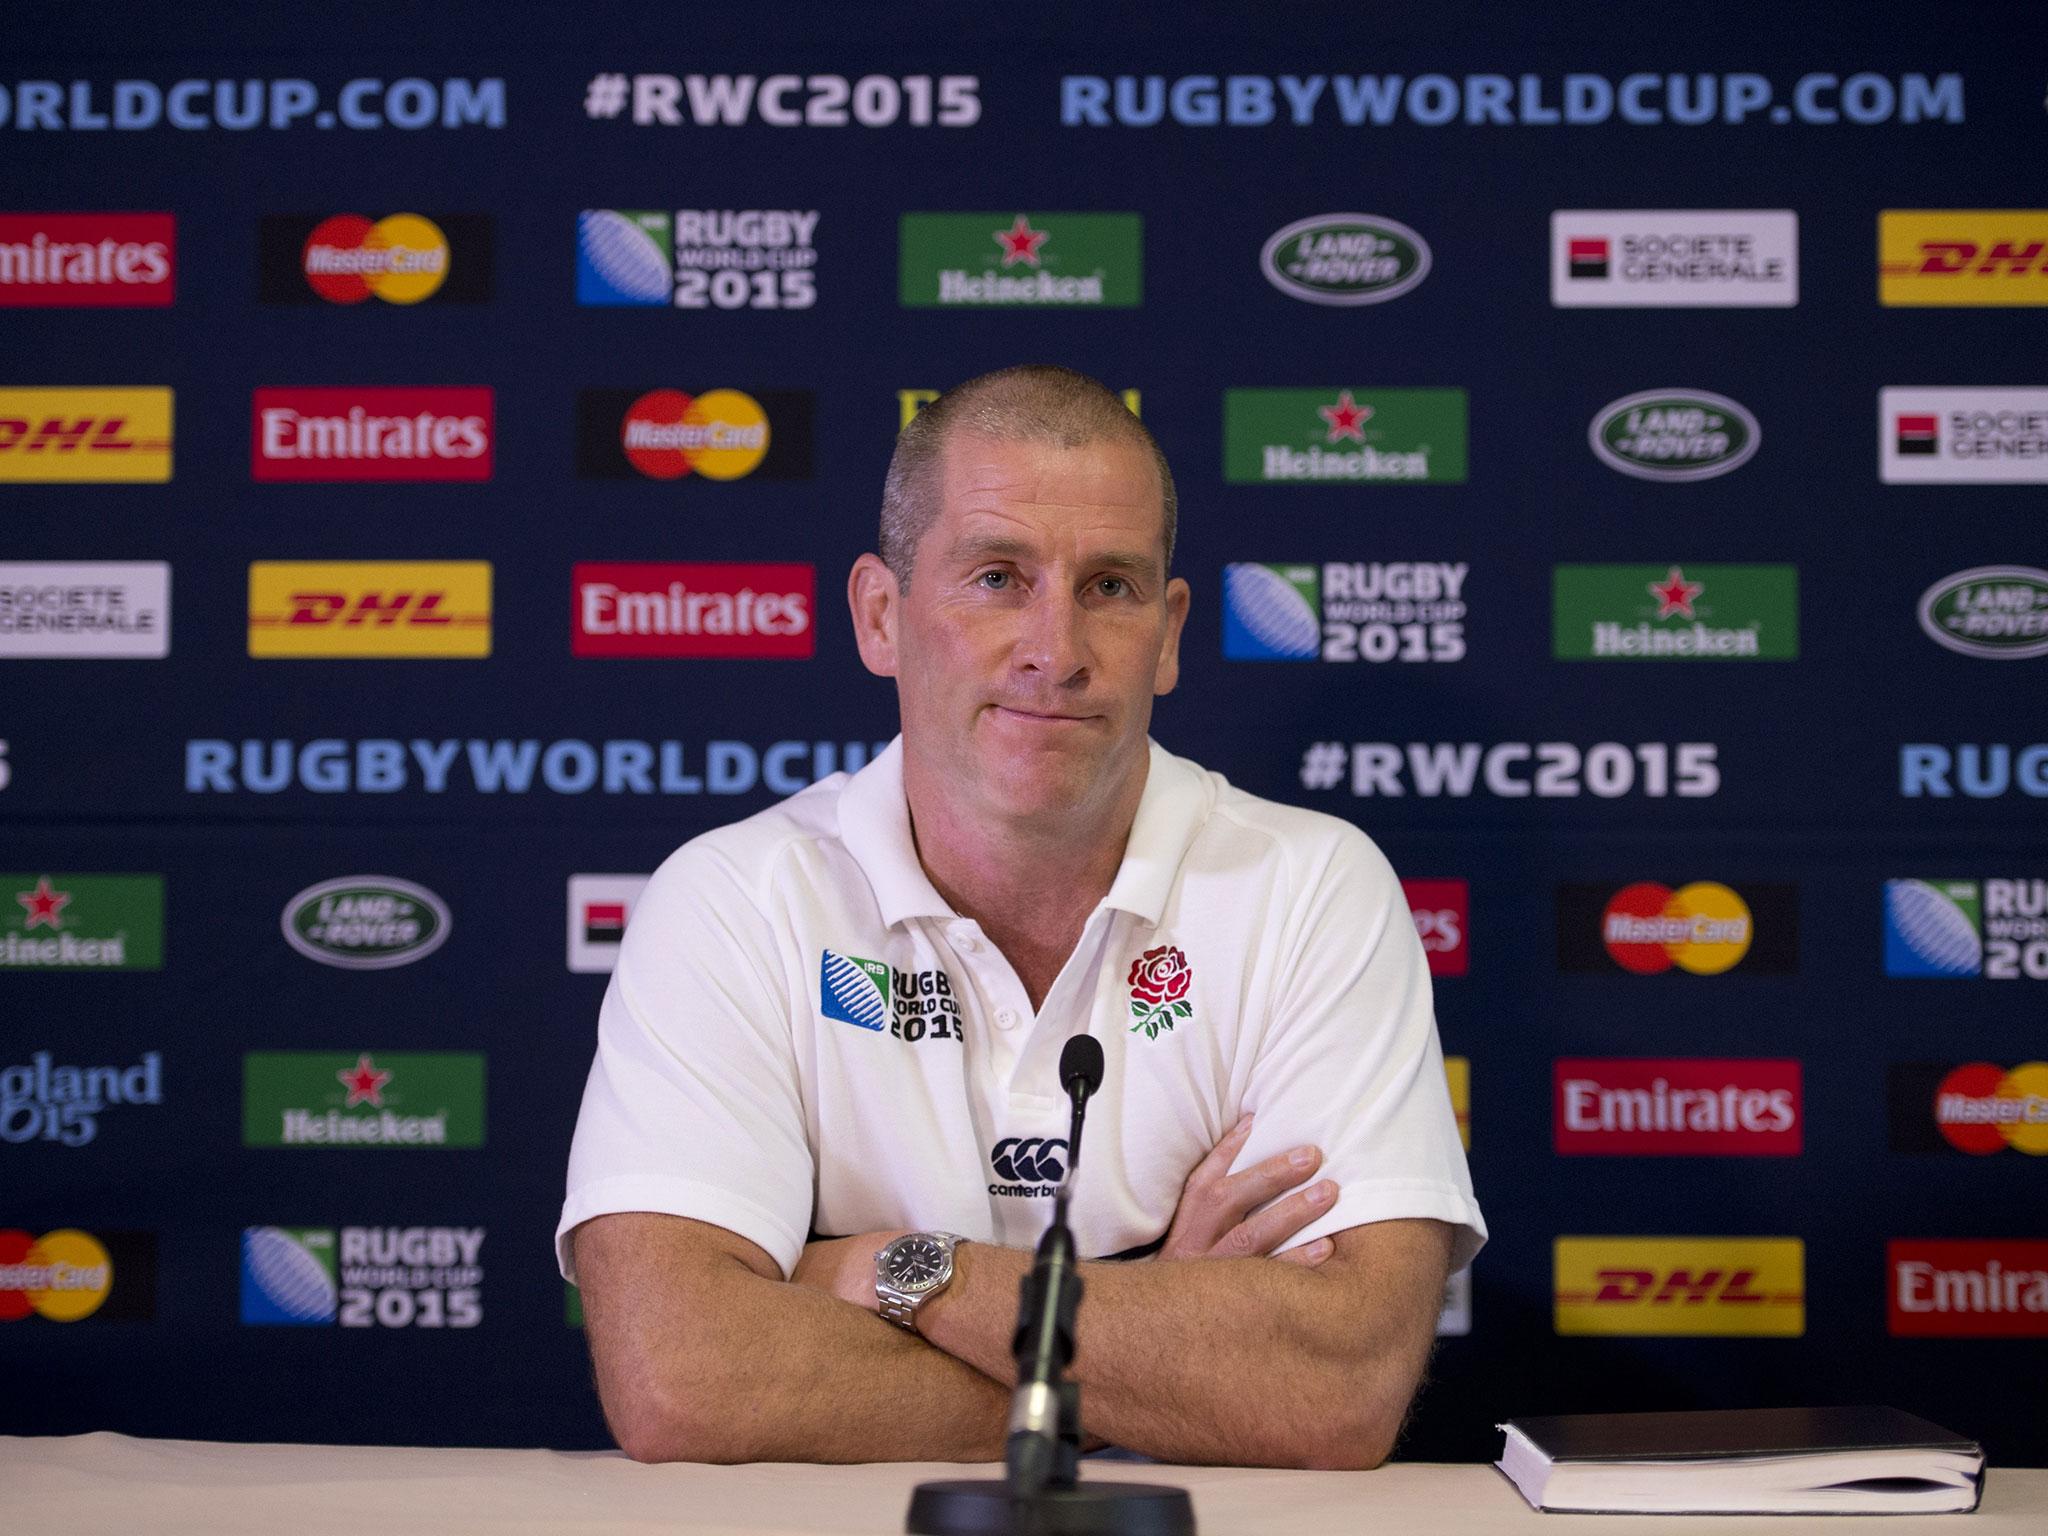 Lancaster was dismissed as England head coach after the 2015 Rugby World Cup